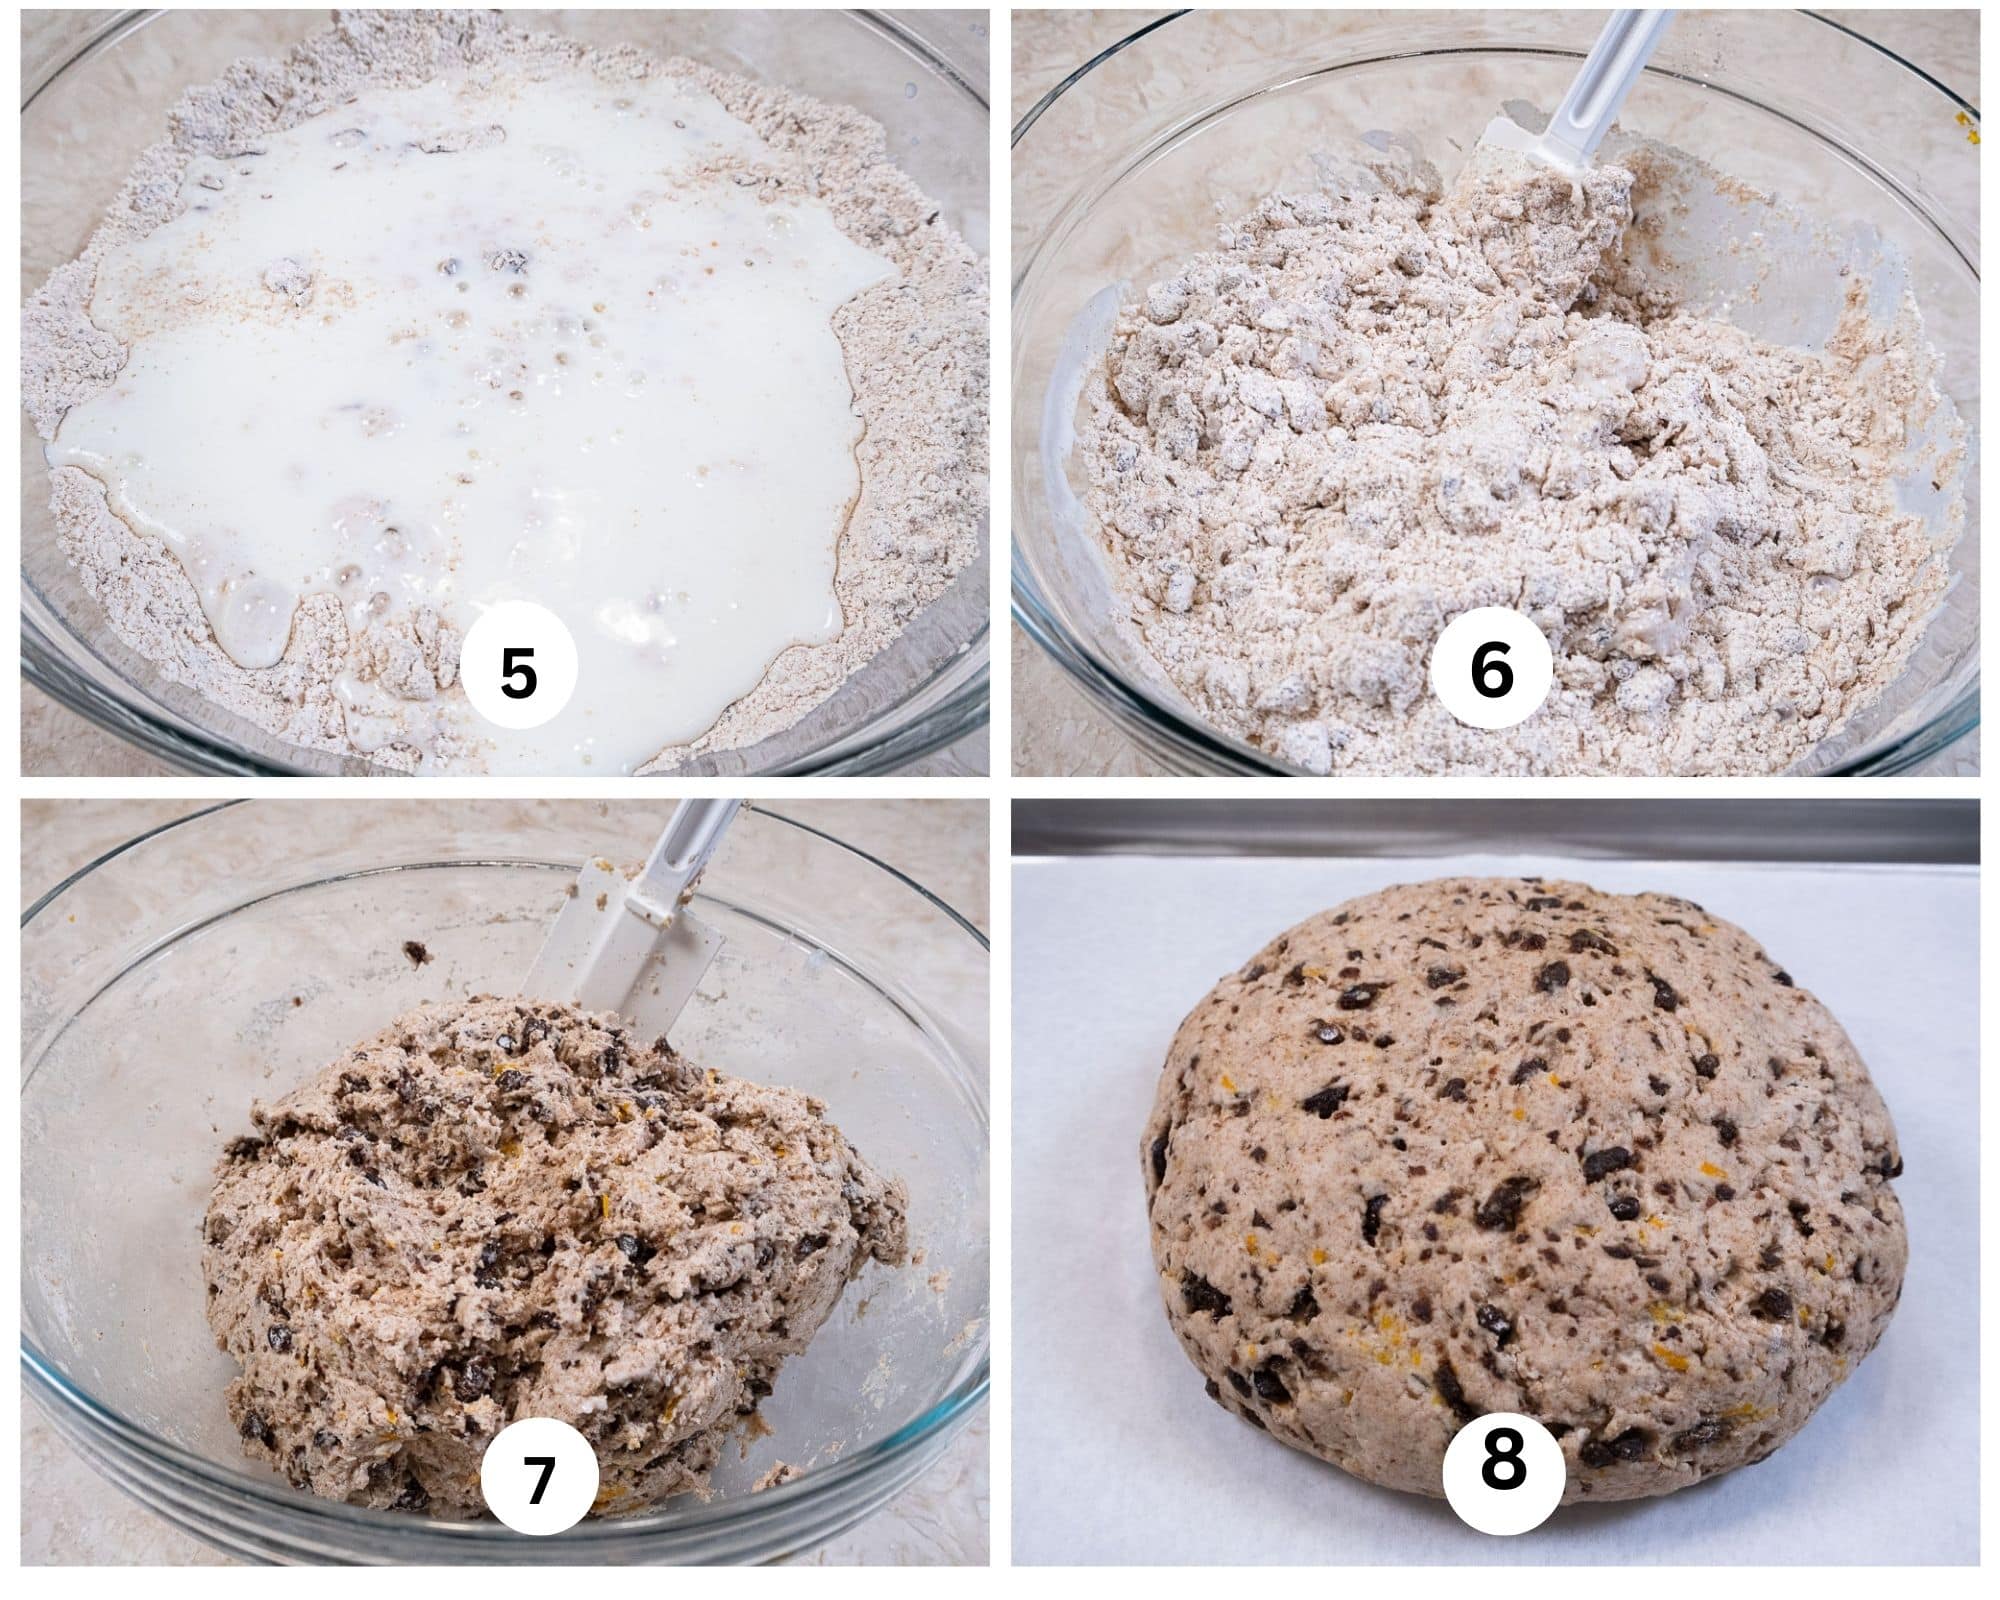 This collage shows the buttermilk added, mixing it in, mixed in the bowl, and shaped.